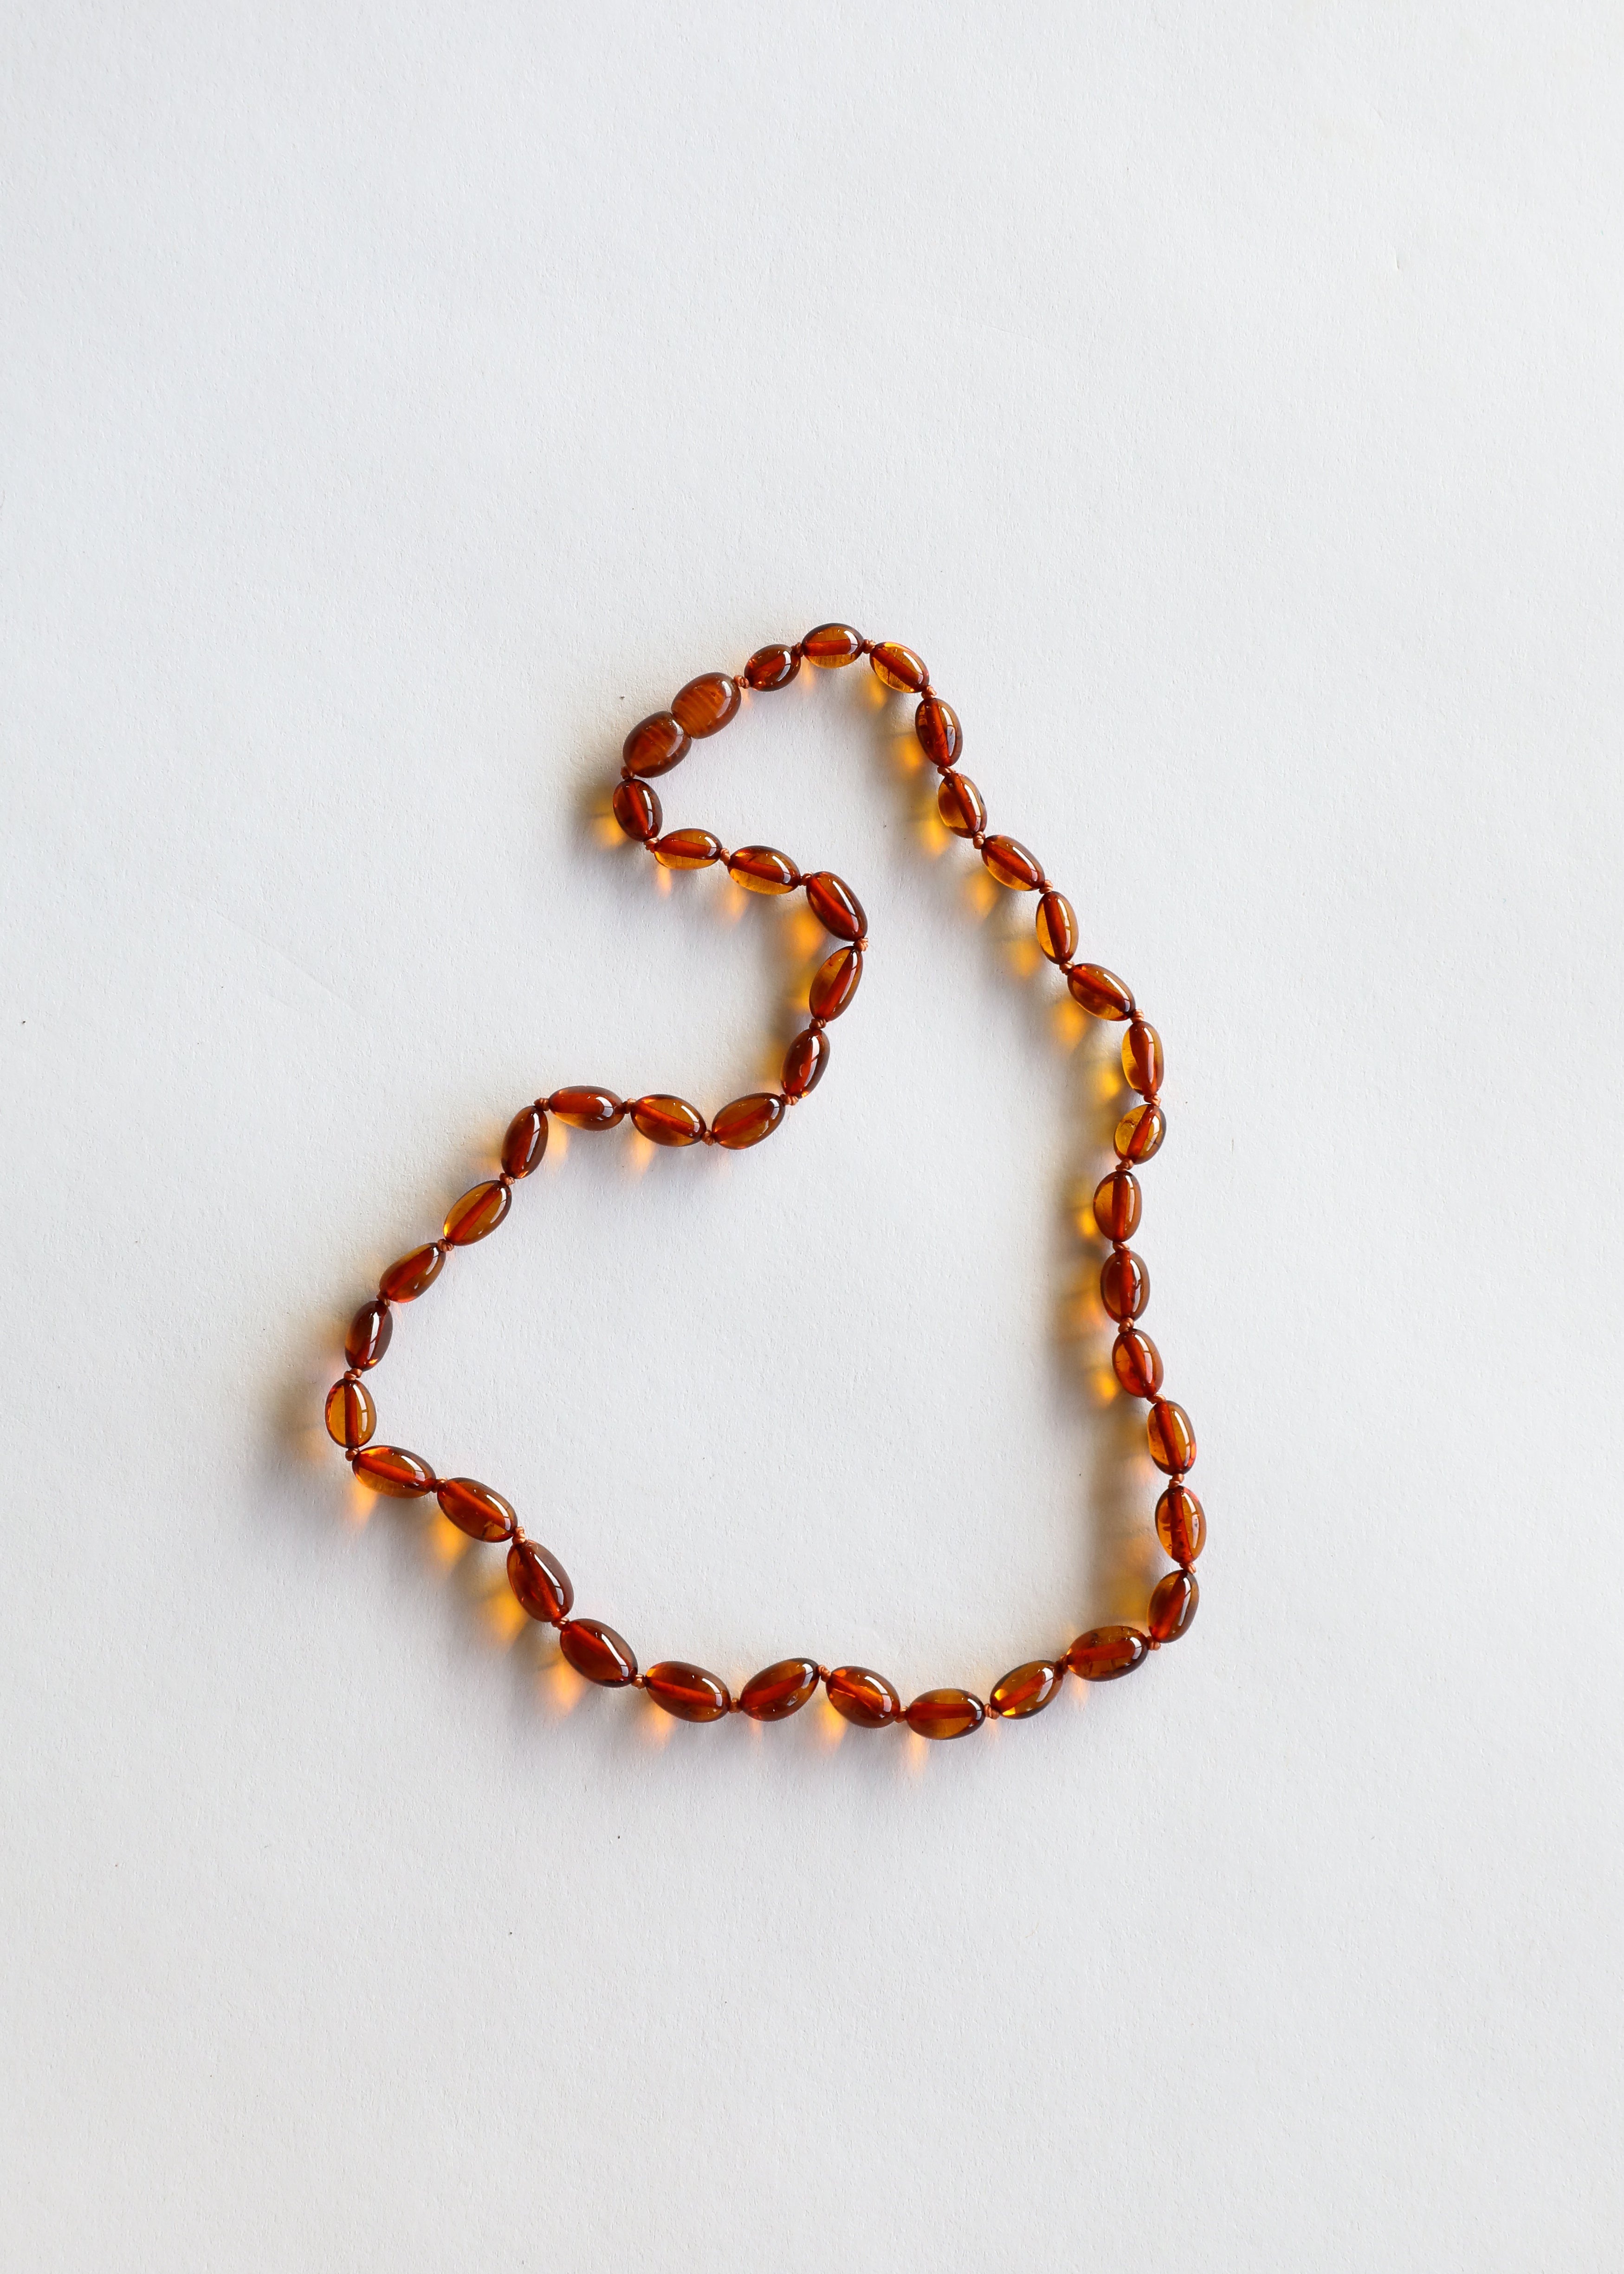 Polished Cognac Baltic Amber || Classic || Necklace